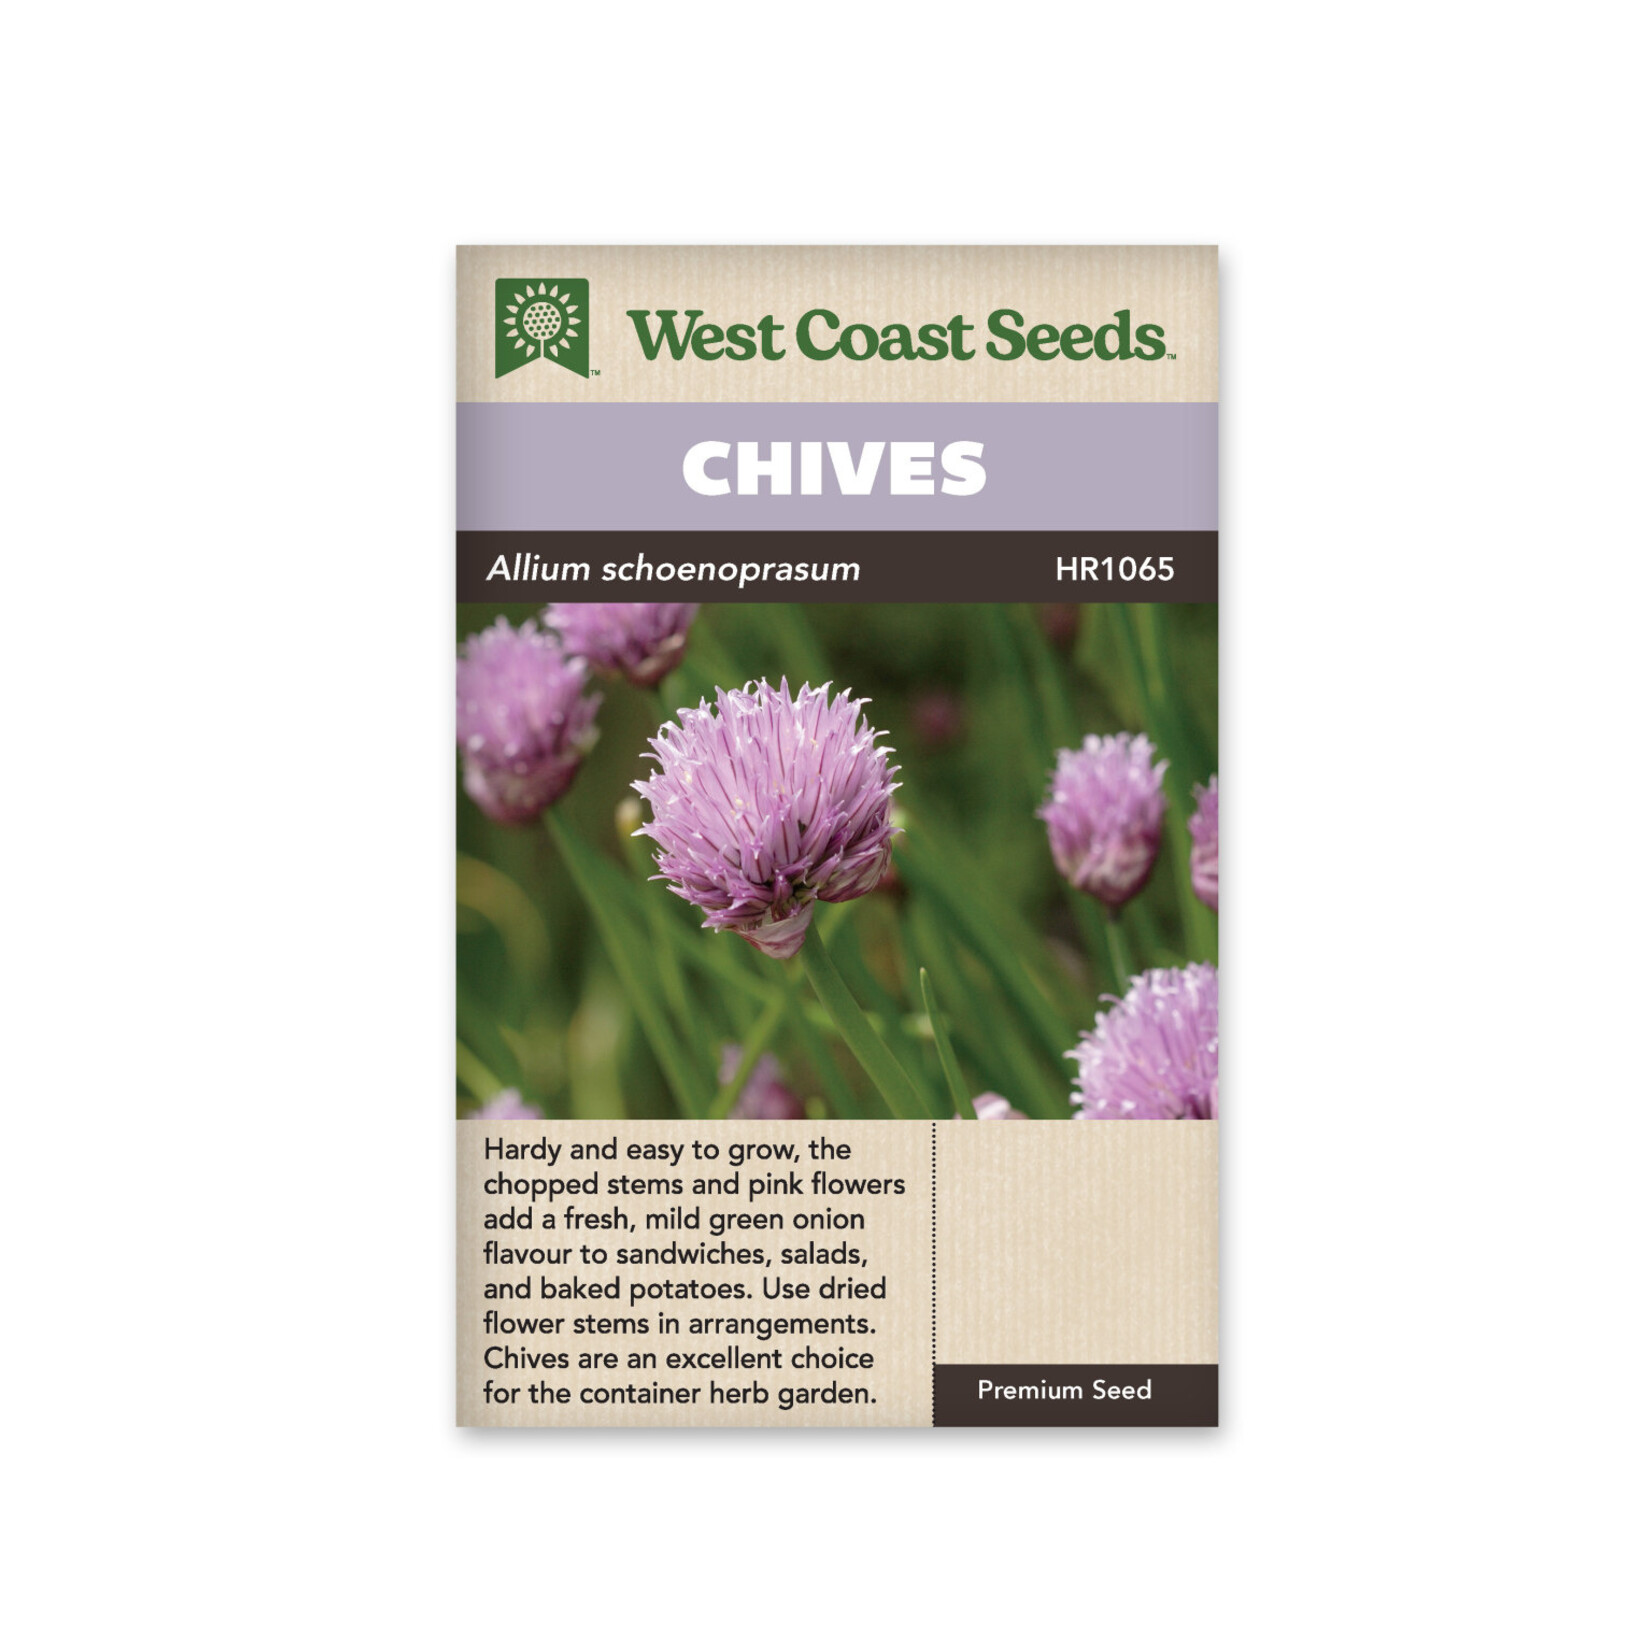 West Coast Seeds Chives - Chives